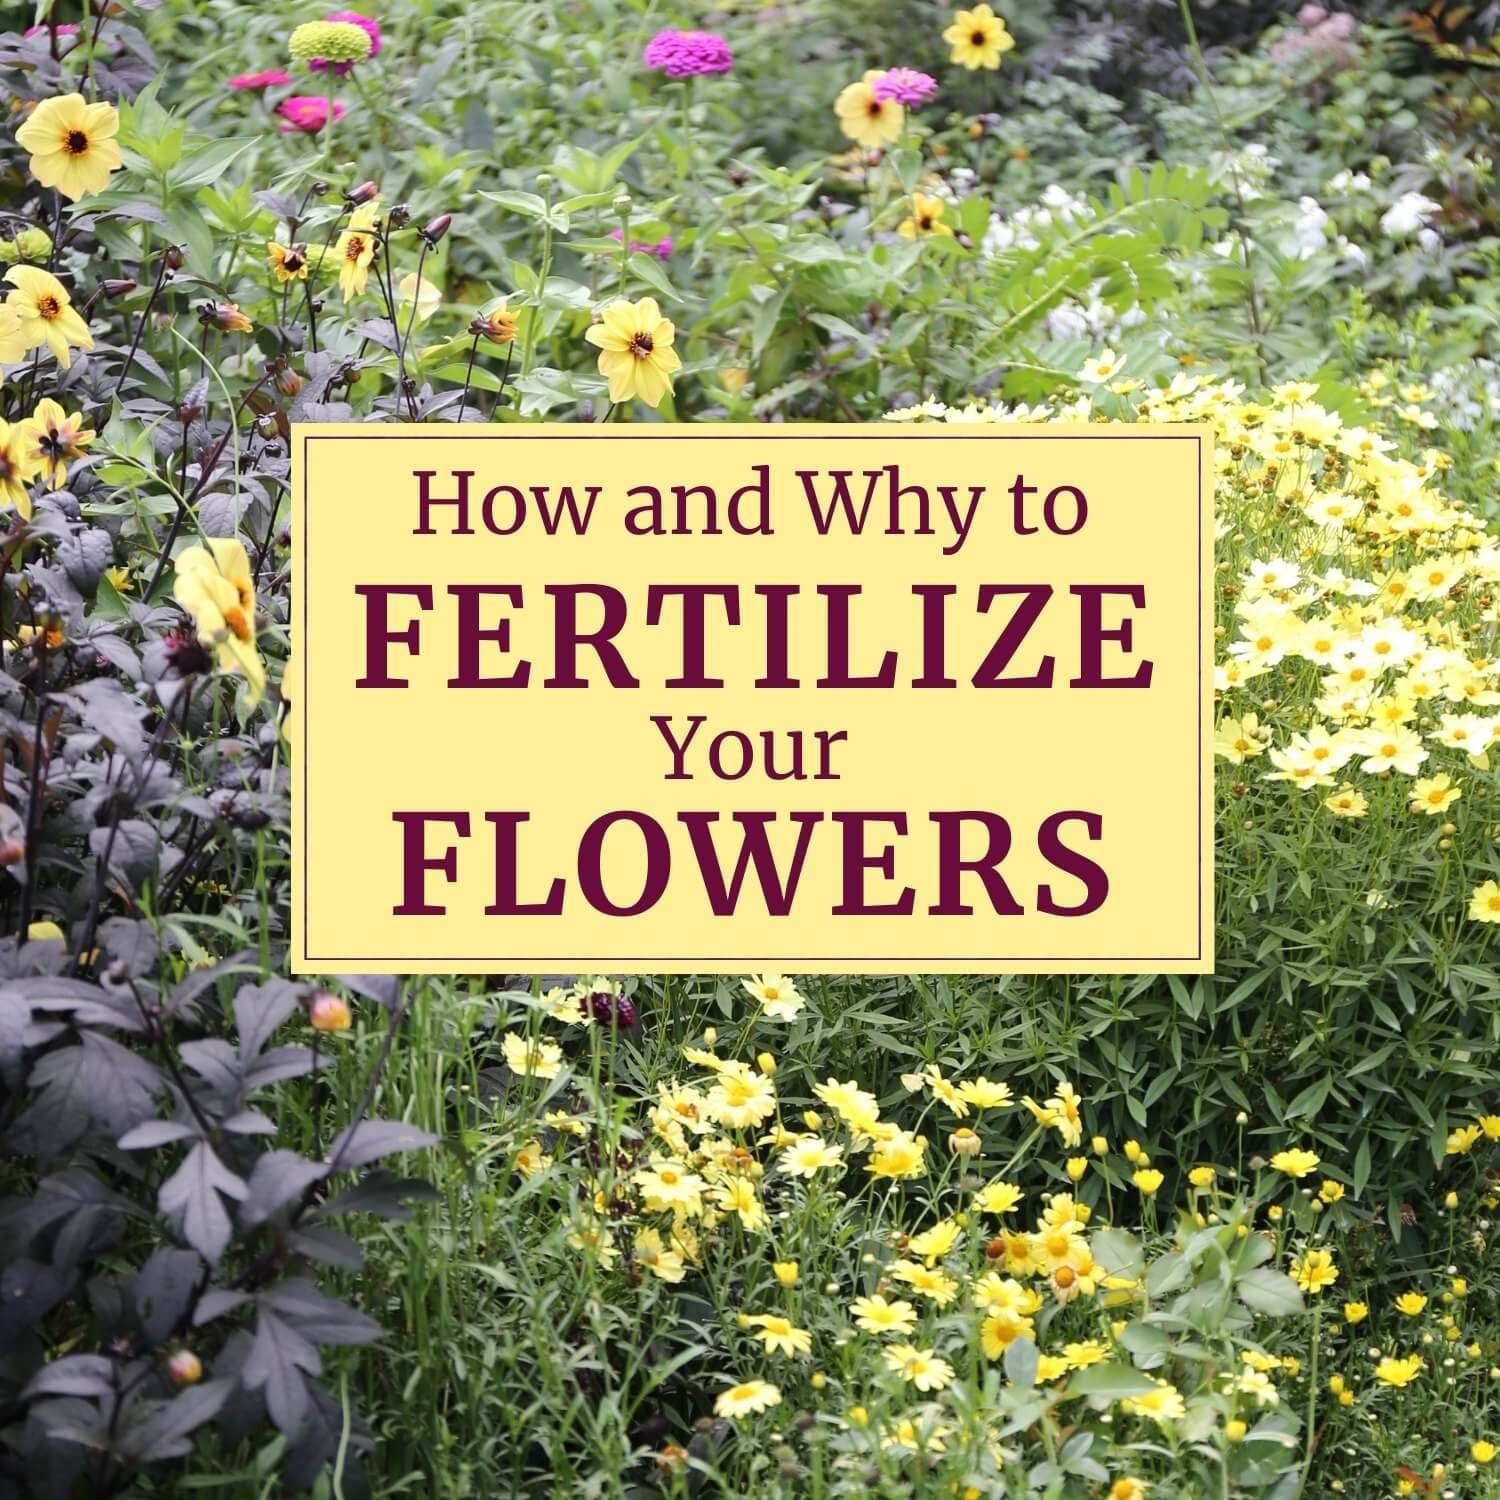 The Top Flower Garden Fertilizers for Optimal Growth and Blooms